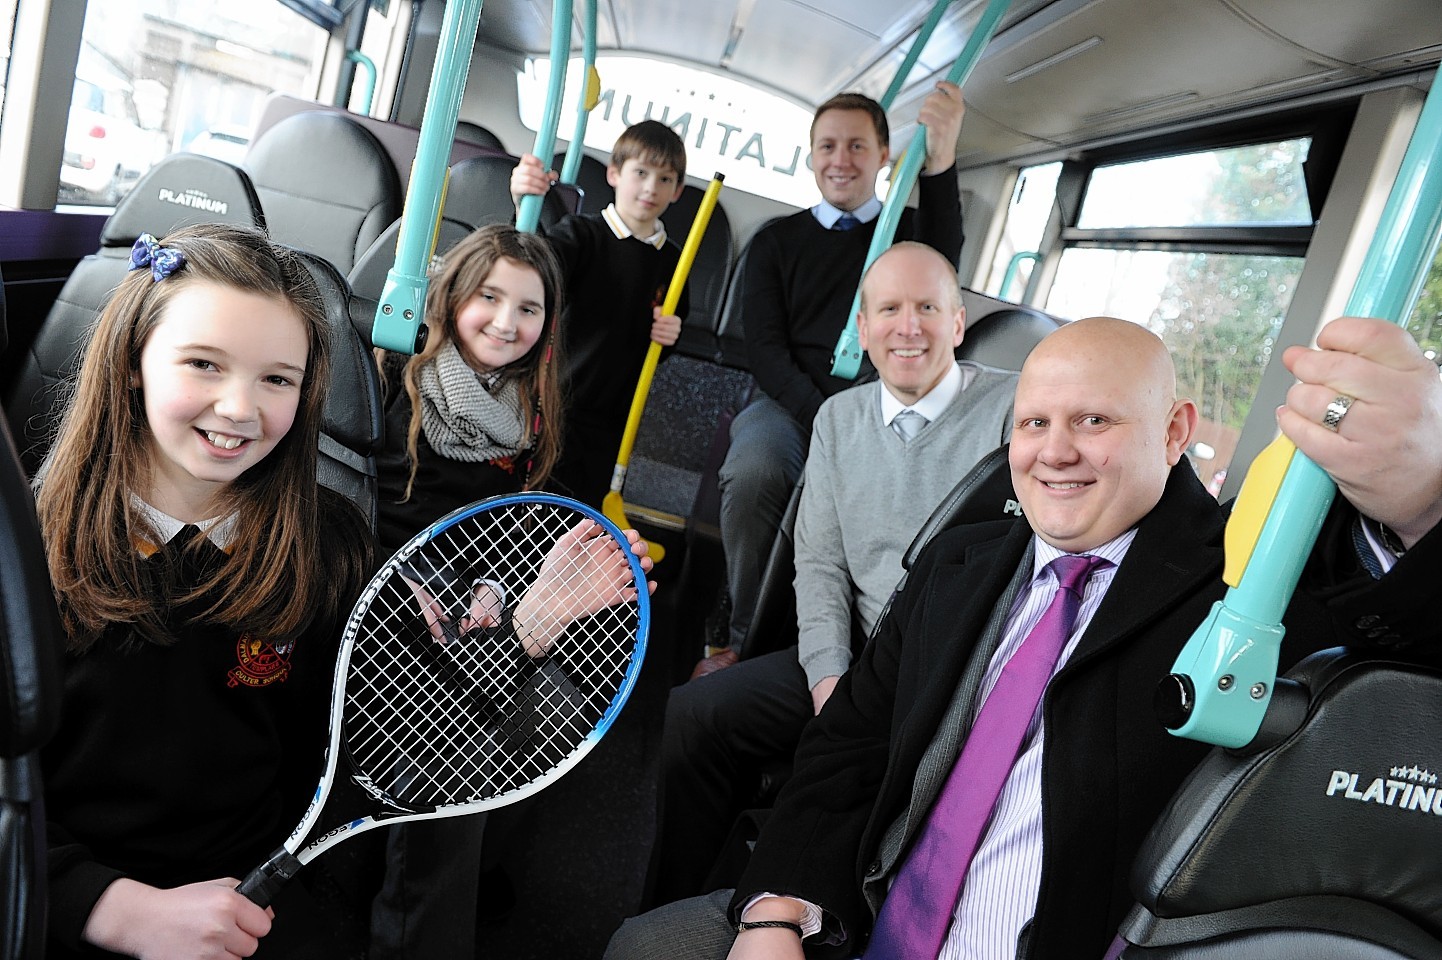 First Bus Aberdeen announced as the official sponsor of the Aberdeen Youth Games, on a visit by First Aberdeen managing director David Phillips to Culter Primary.       